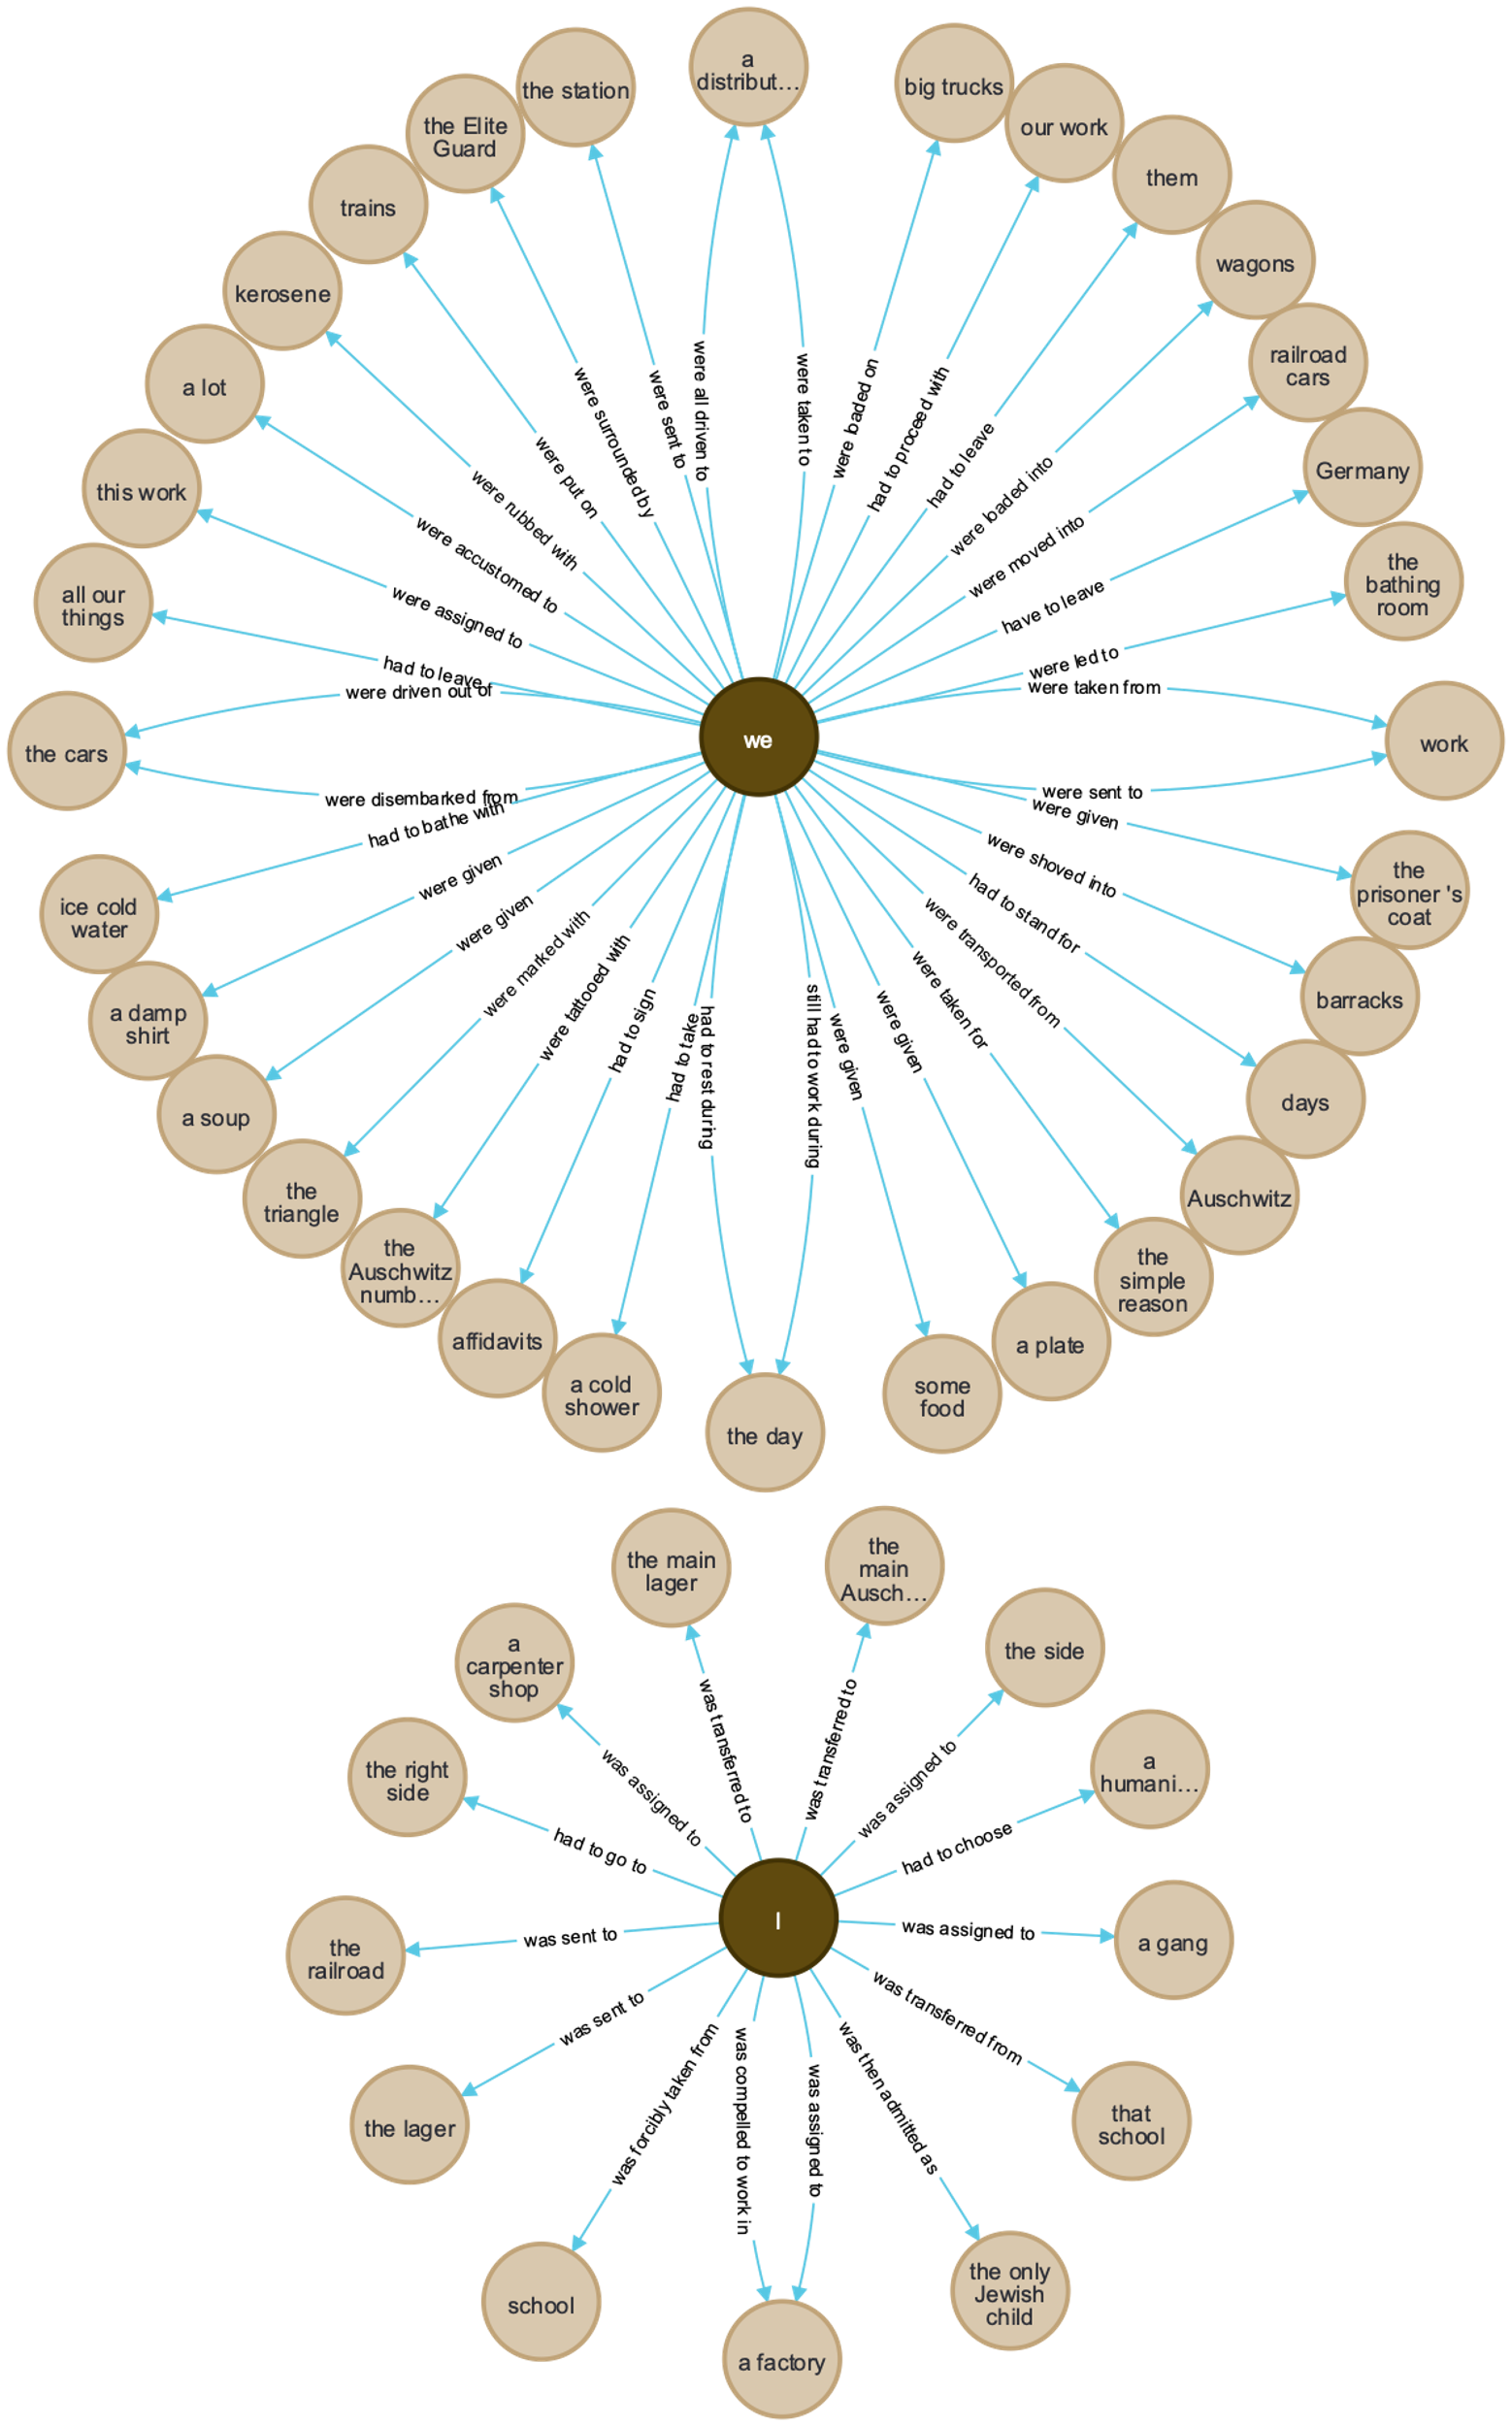  Two branching circle-shaped diagrams of sentences from Boder's interview of
                  Bassfreund, where  and  from the center of two separate branched
                  diagrams. Radiating out from the centers are blue arrows labeled with verb chunks.
                  The blue arrows point to corresponding noun chunks. For example, one sentence
                  reads:  (center, subject) /  (blue arrow) / 
                  (object noun chunk). 